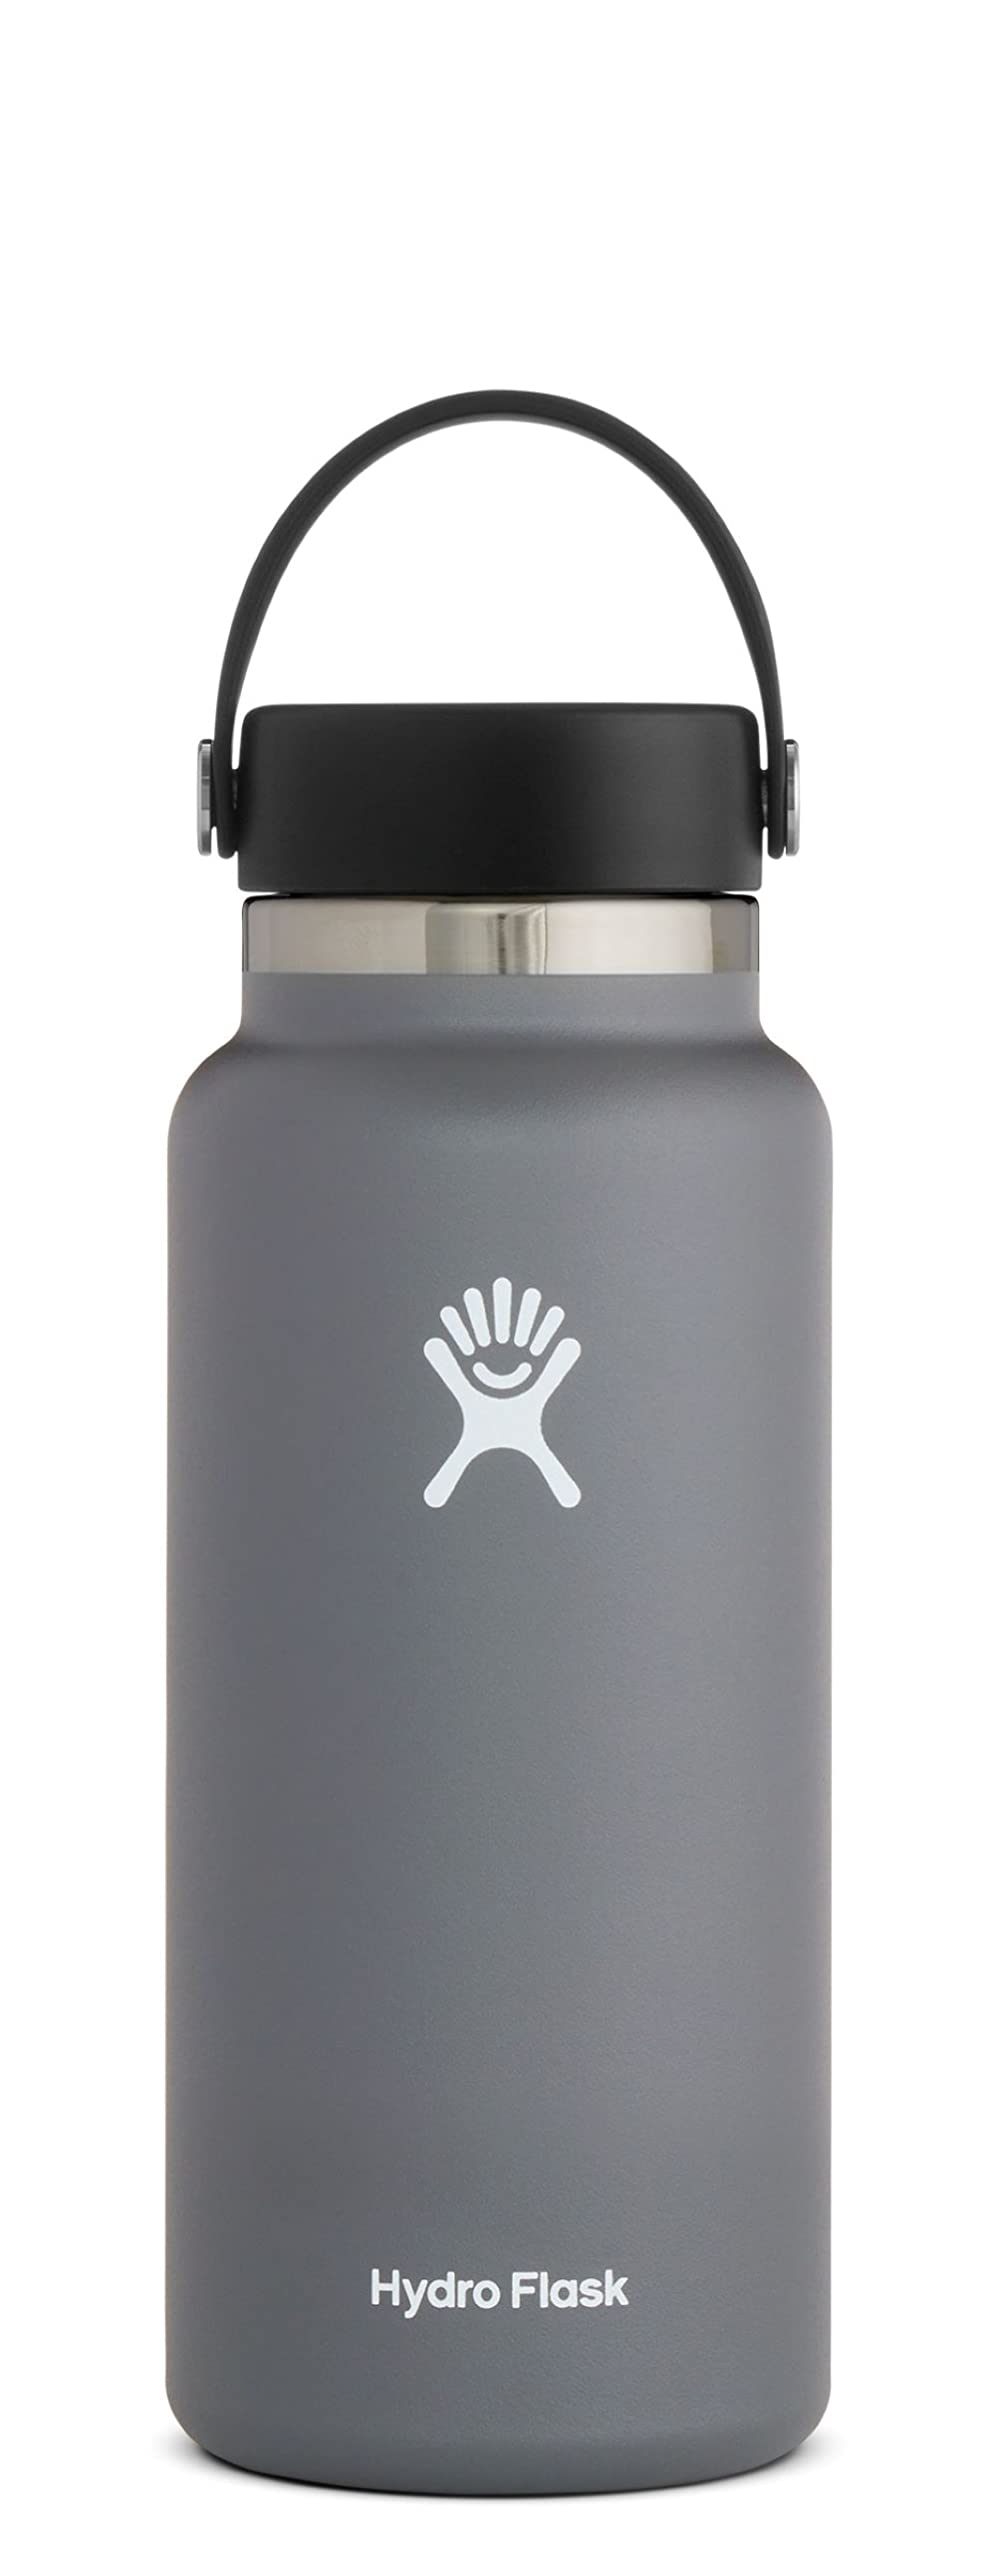 Hydro Flask 32 oz Vacuum Insulated Stainless Steel Water Bottle Flask - Flex Cap with Strap  - Wide Mouth - Stone